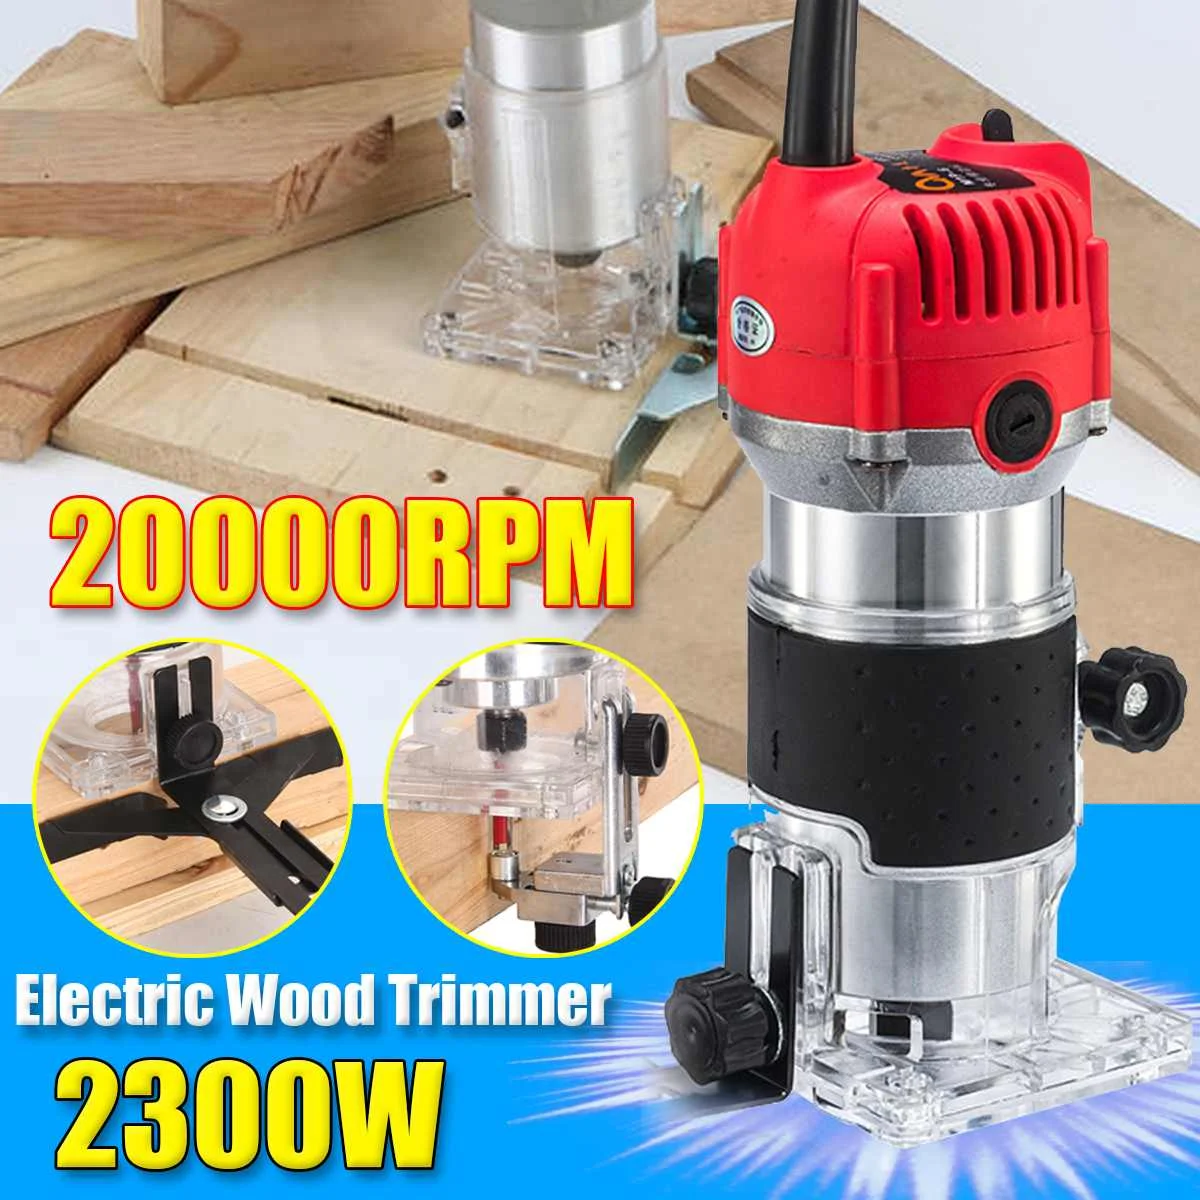 

Drillpro 110V/220V 20000rpm Electric Hand Trimmer 2300W Router Wood Laminate Palm Joiners Working Cutting Tool Carving Machine